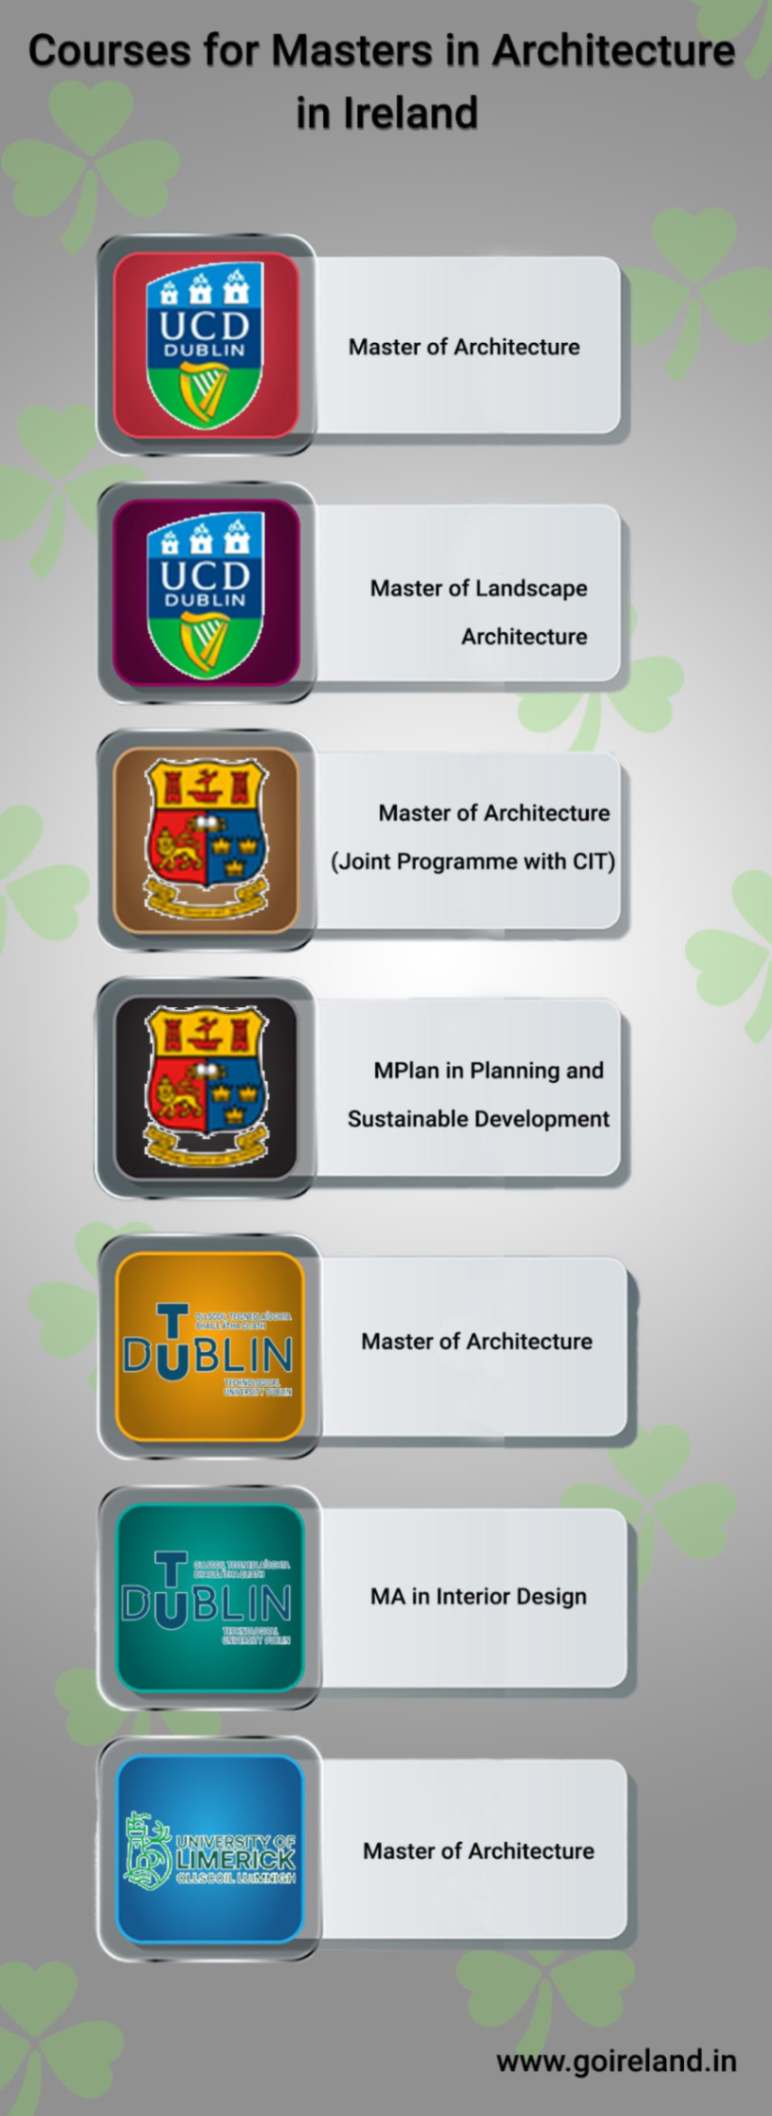 Courses for Masters in Architecture in Ireland